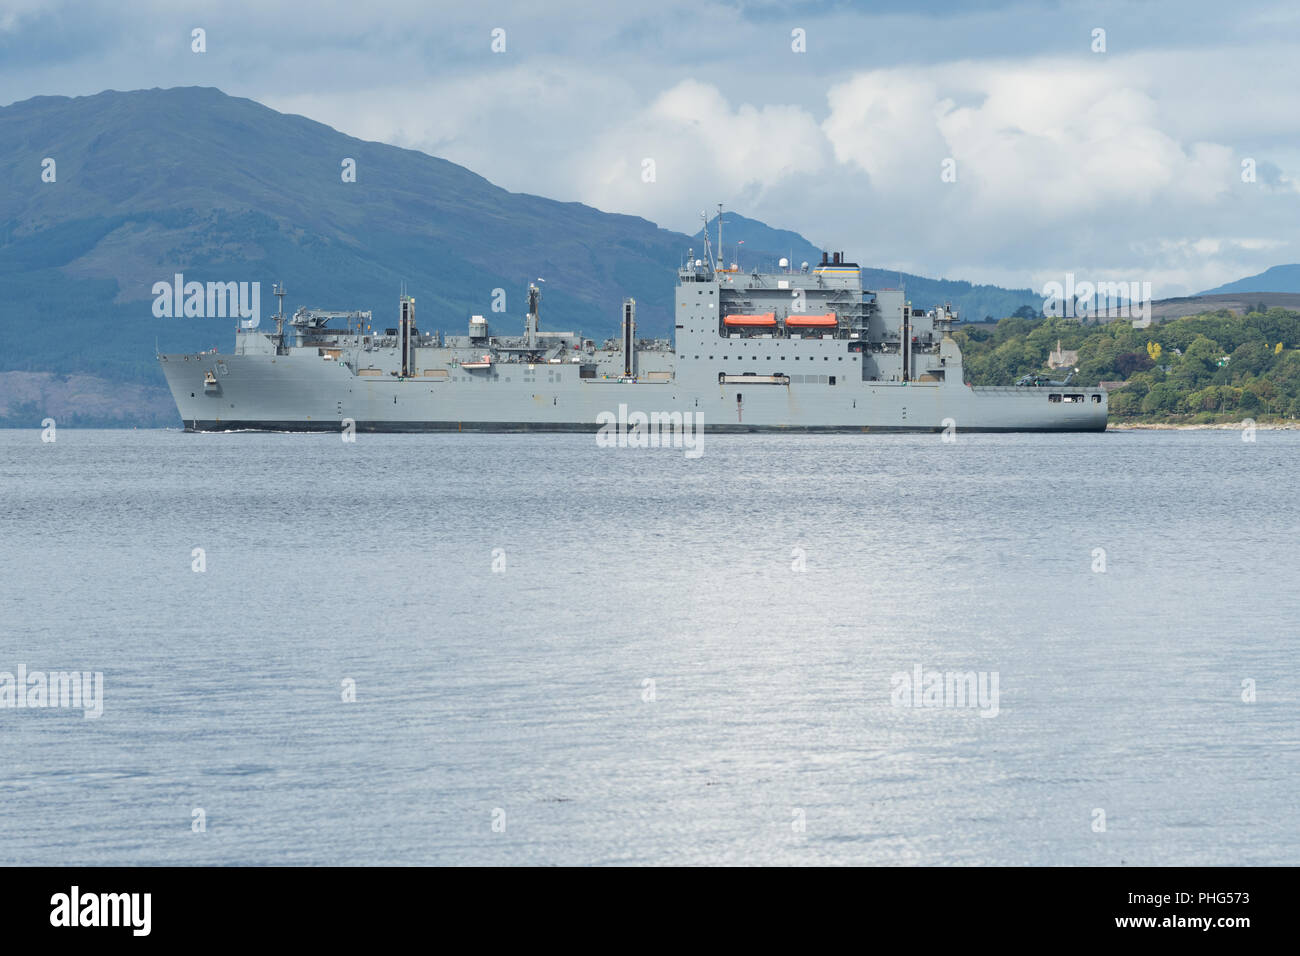 USNS Medgar Evers (T-AKE-13) United States Navy Lewis and Clark class dry cargo ship in the Firth of Clyde, Scotland, UK Stock Photo